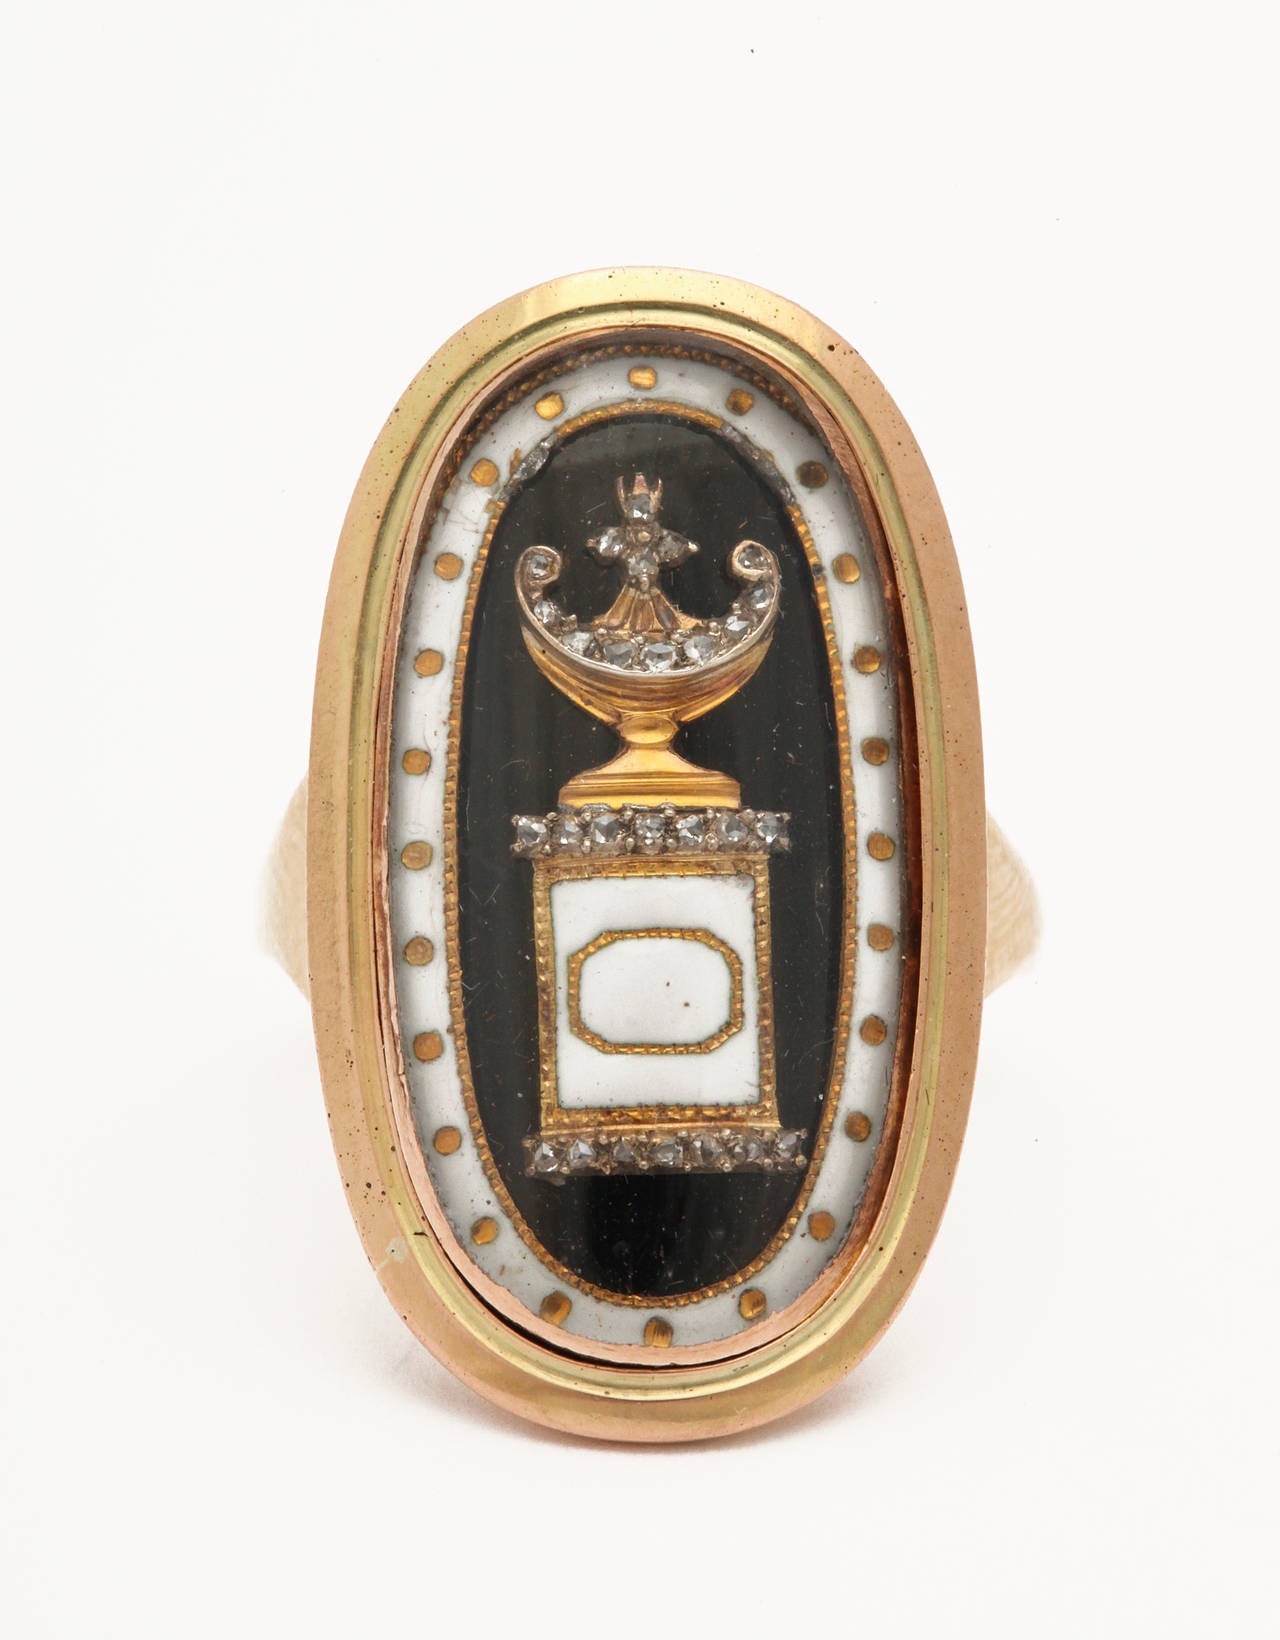 This 15kt Memento Mori touches the heart with its beauty and with its story. An oval bezel holds a crystal that covers the black and white enamel as well as the glistening diamonds and gold below. The artists sense of symmetry is apparent in the